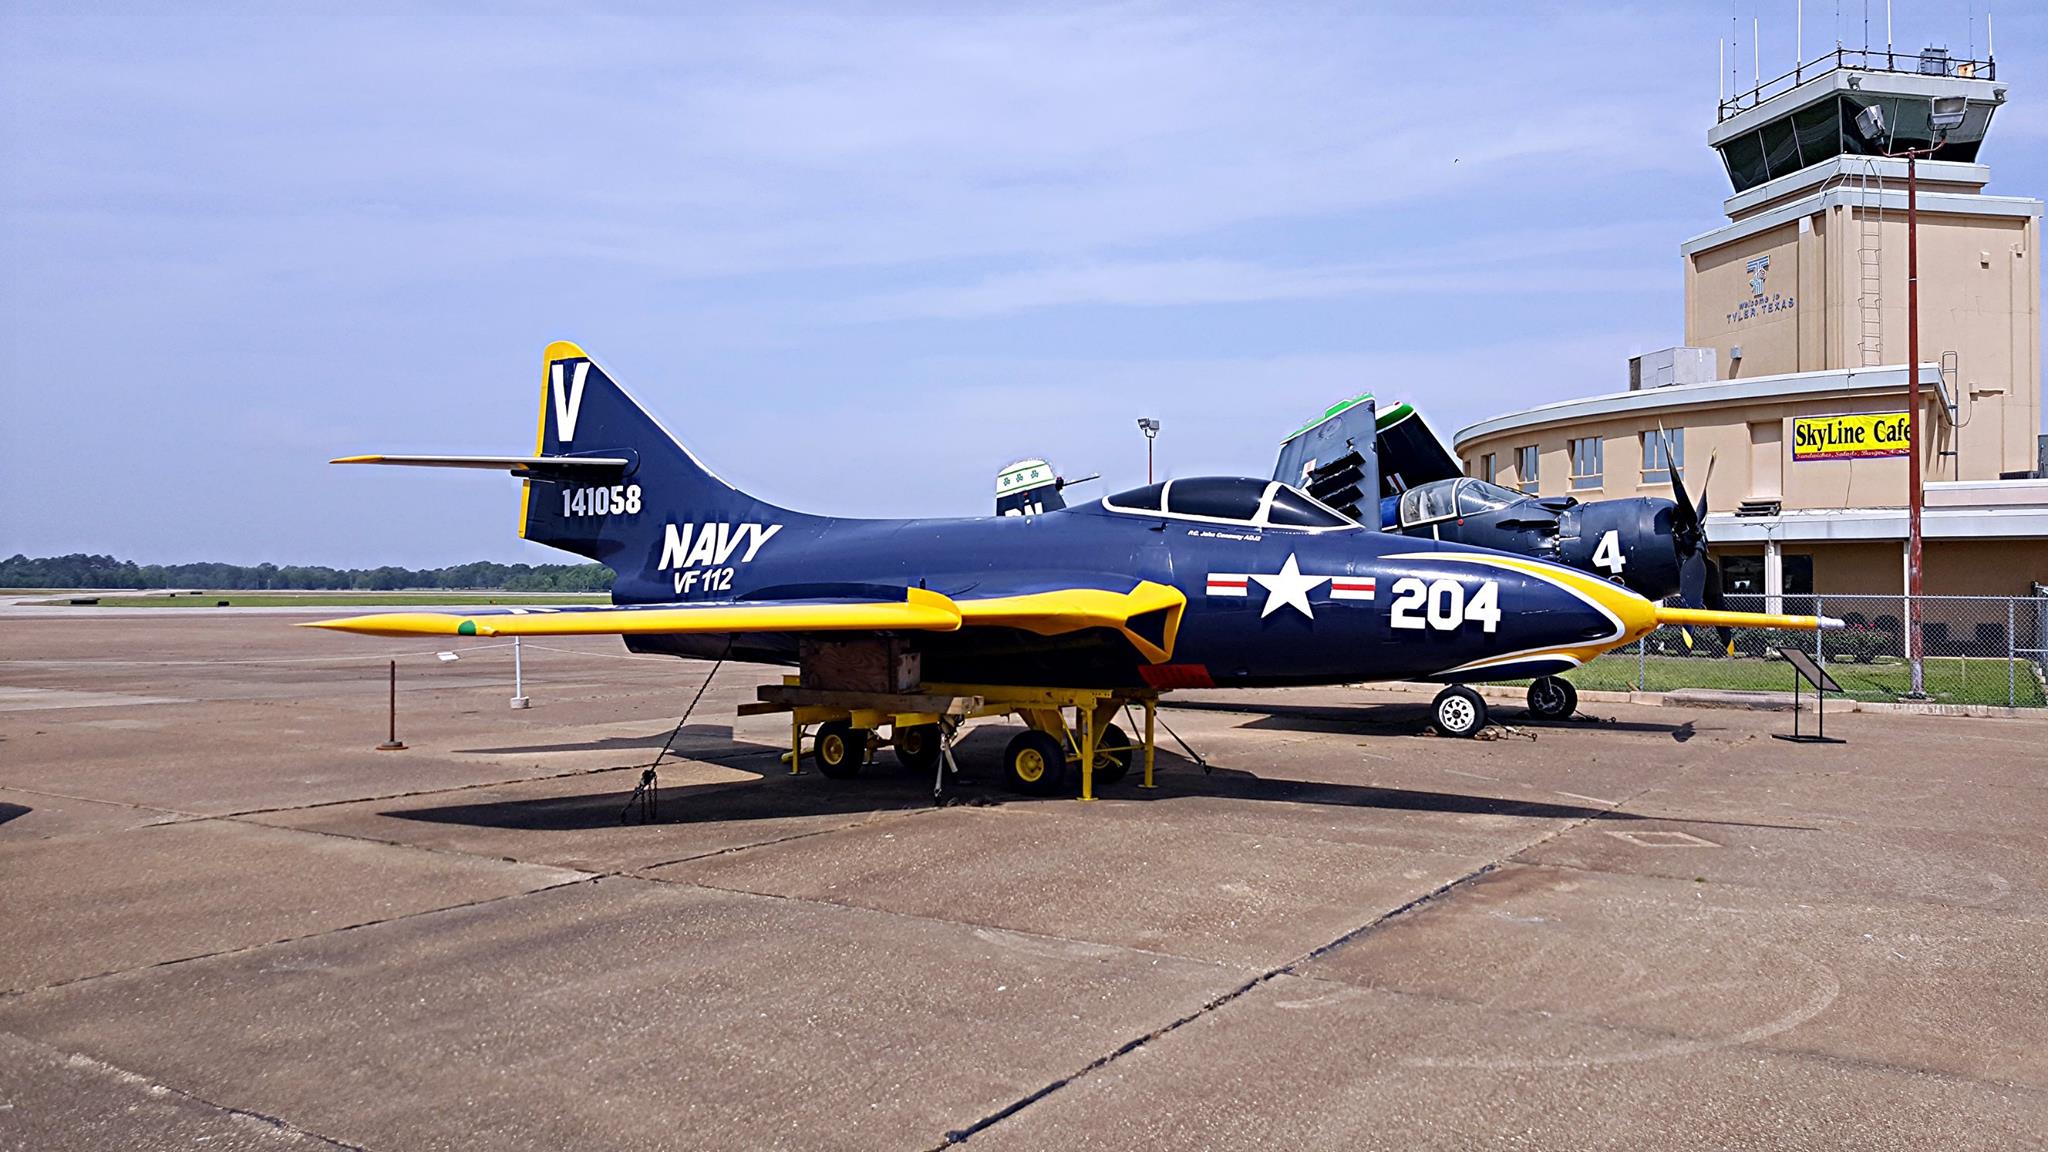 The Museum will be closed to visitors on Friday July 1st, 2022 due to the Rose City Airfest